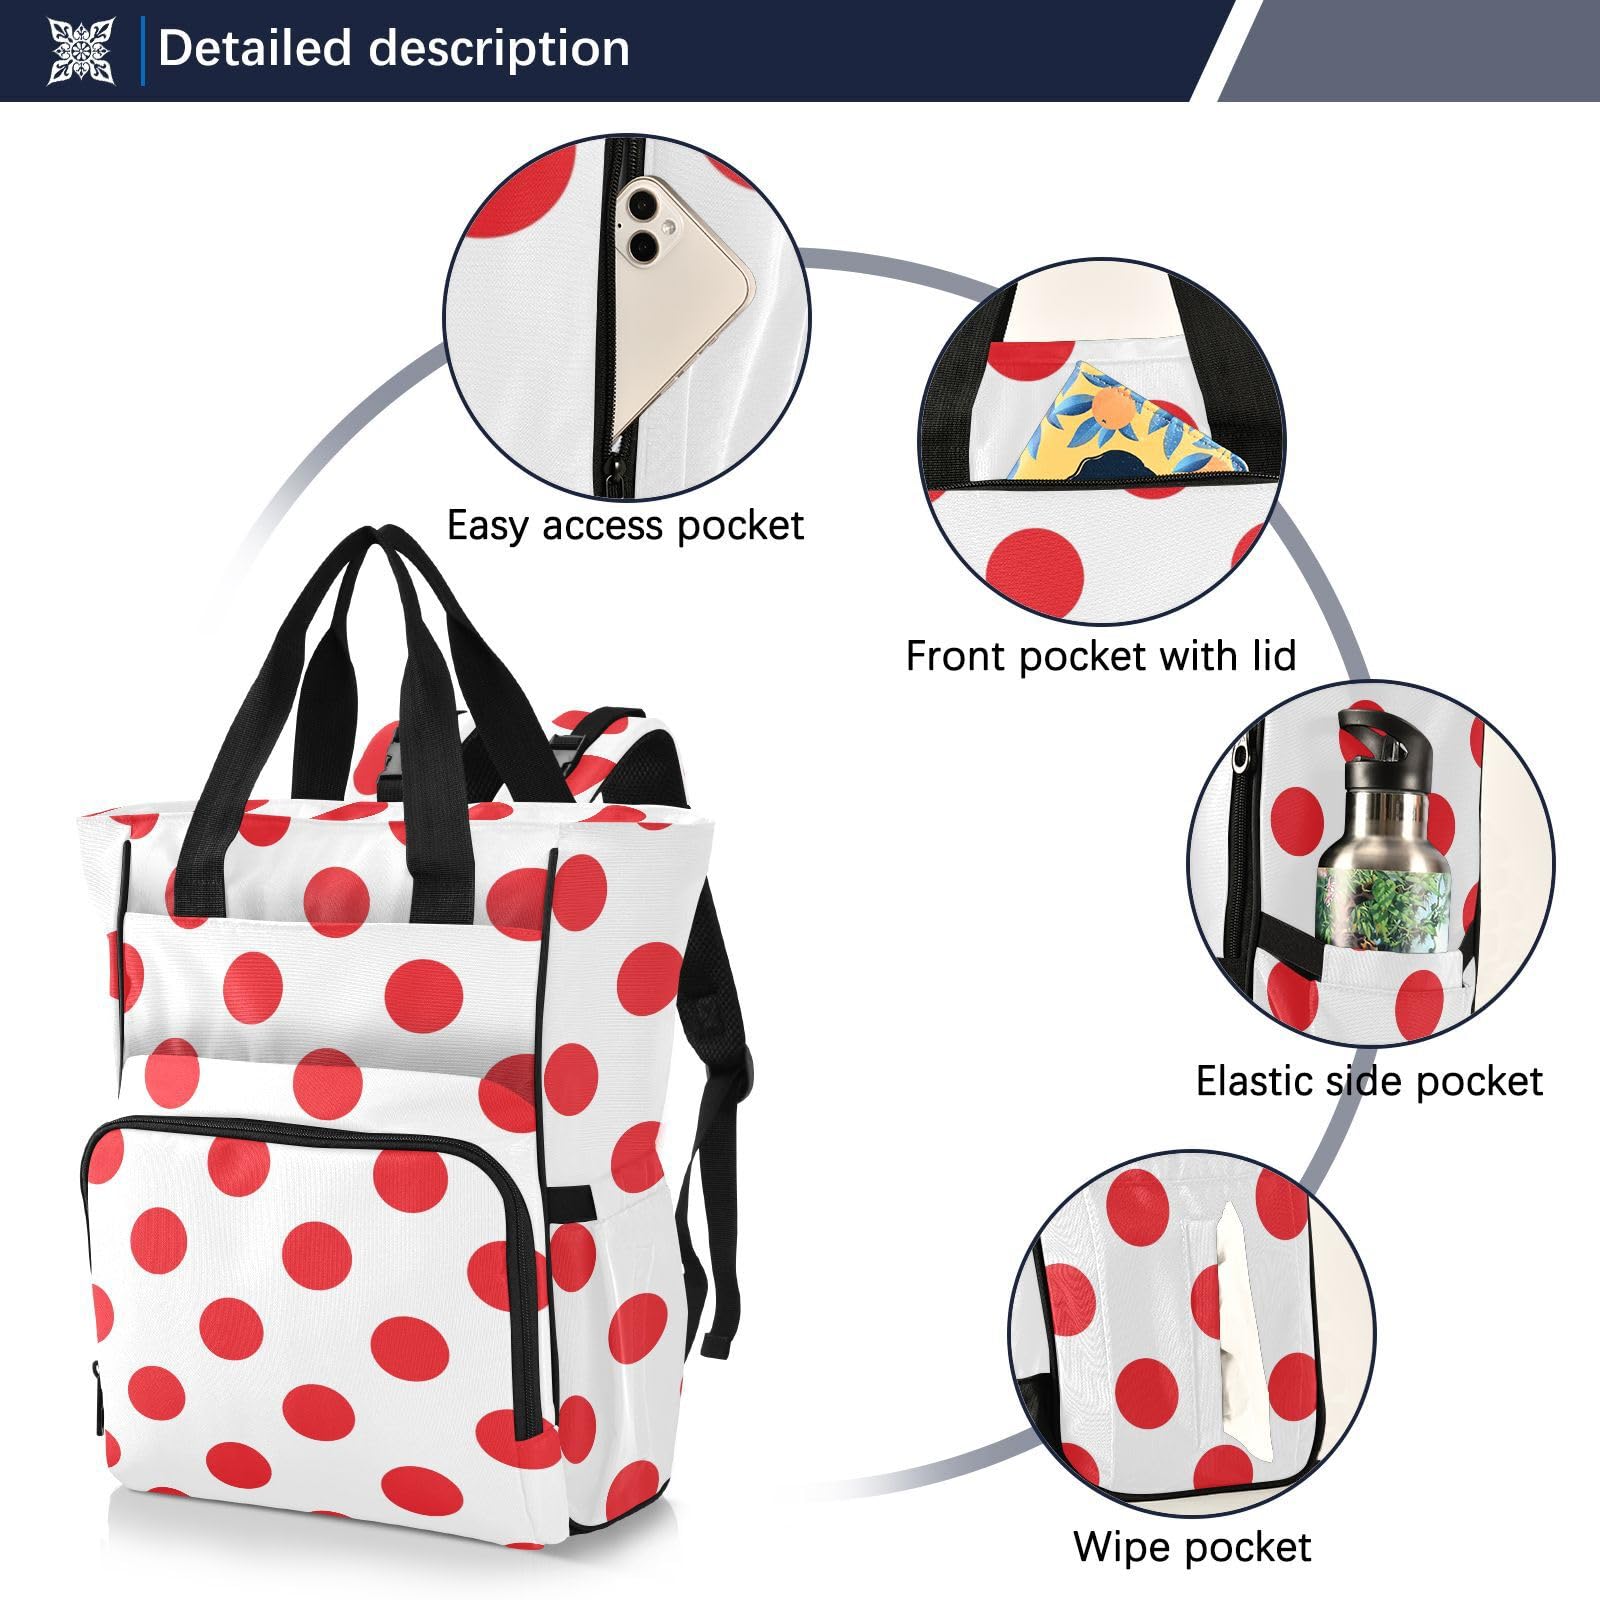 innewgogo Polka Dot Red White Diaper Bag Backpack for Baby Boy Girl Large Capacity Baby Changing Totes with Three Pockets Multifunction Baby Essentials for Playing Shopping Picnicking